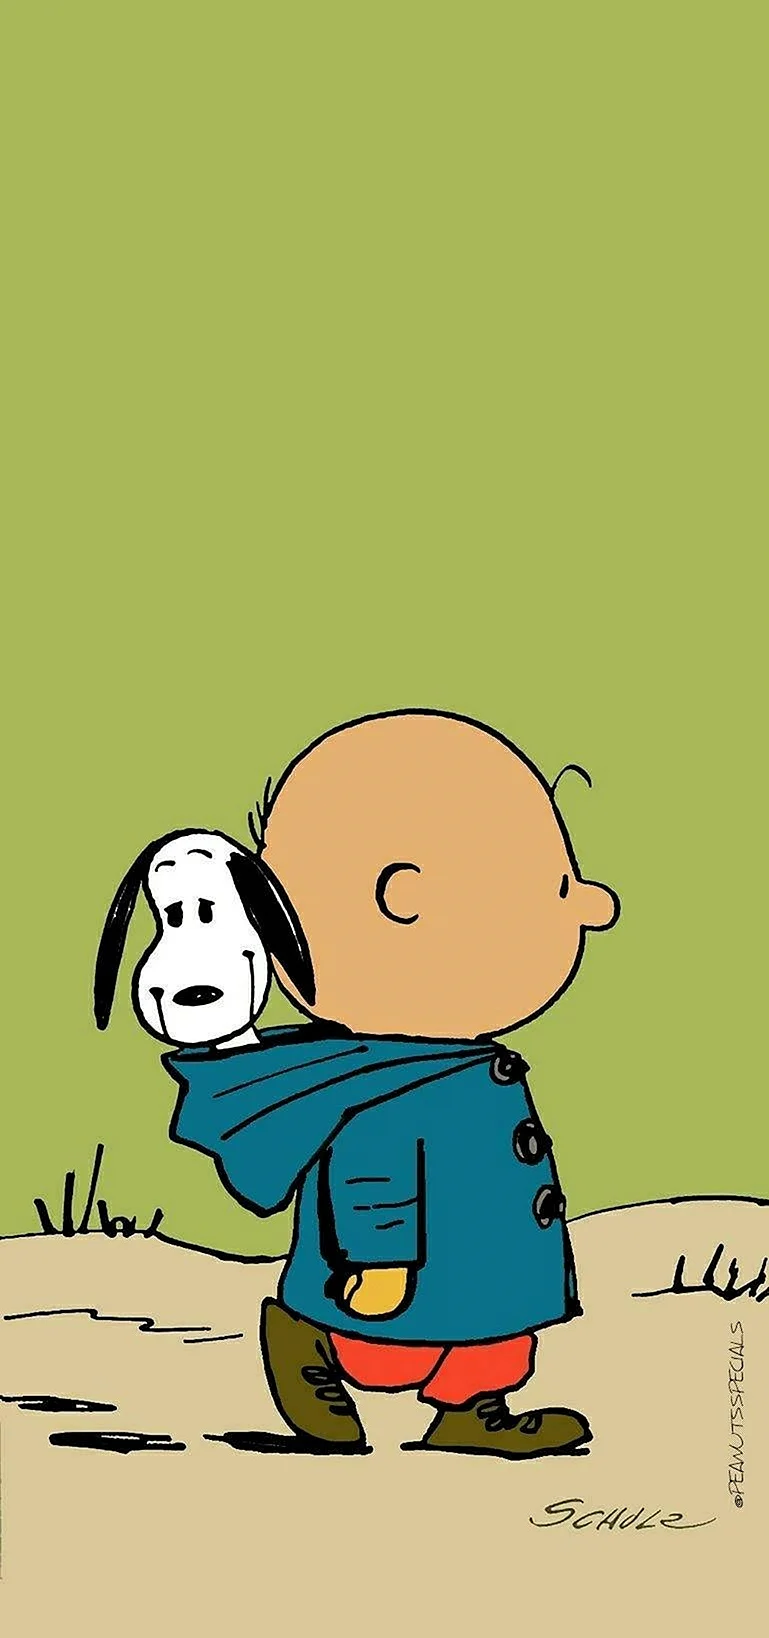 Snoopy Charlie Brown Wallpaper For iPhone